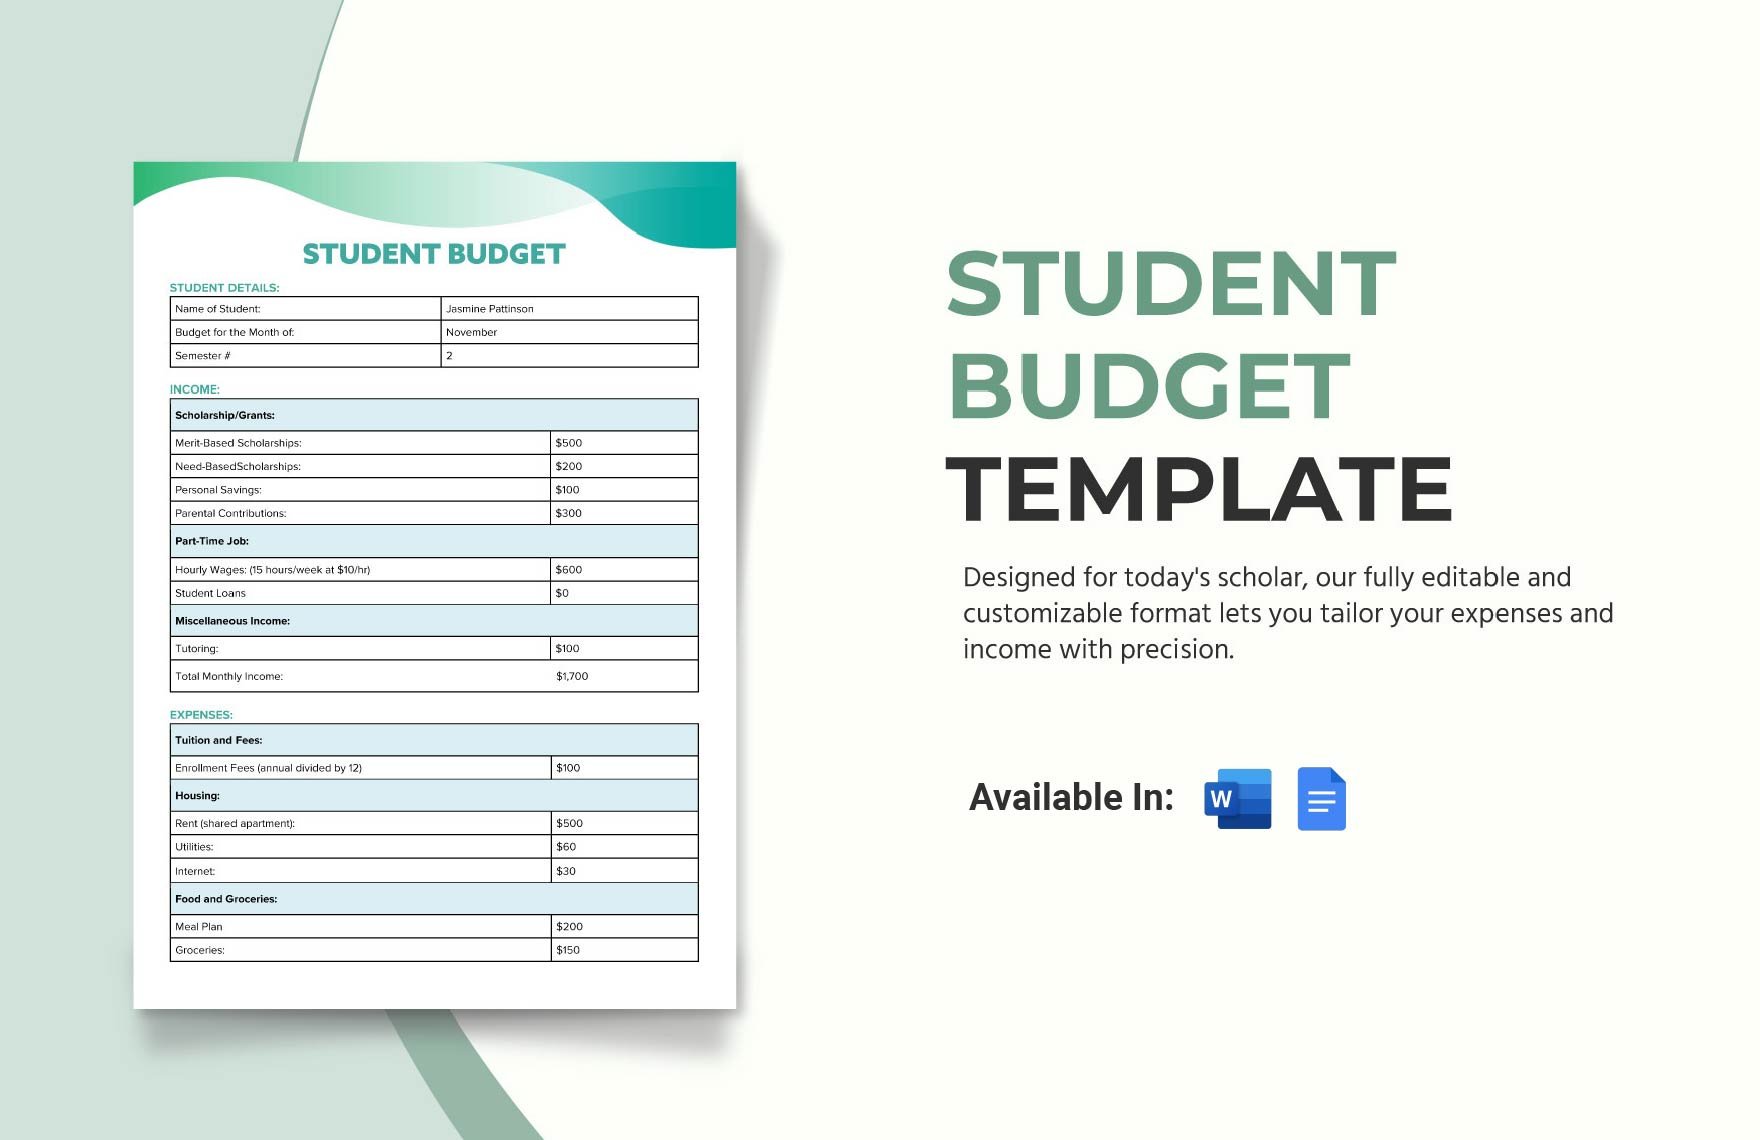 Student Budget Template in Word, Google Docs